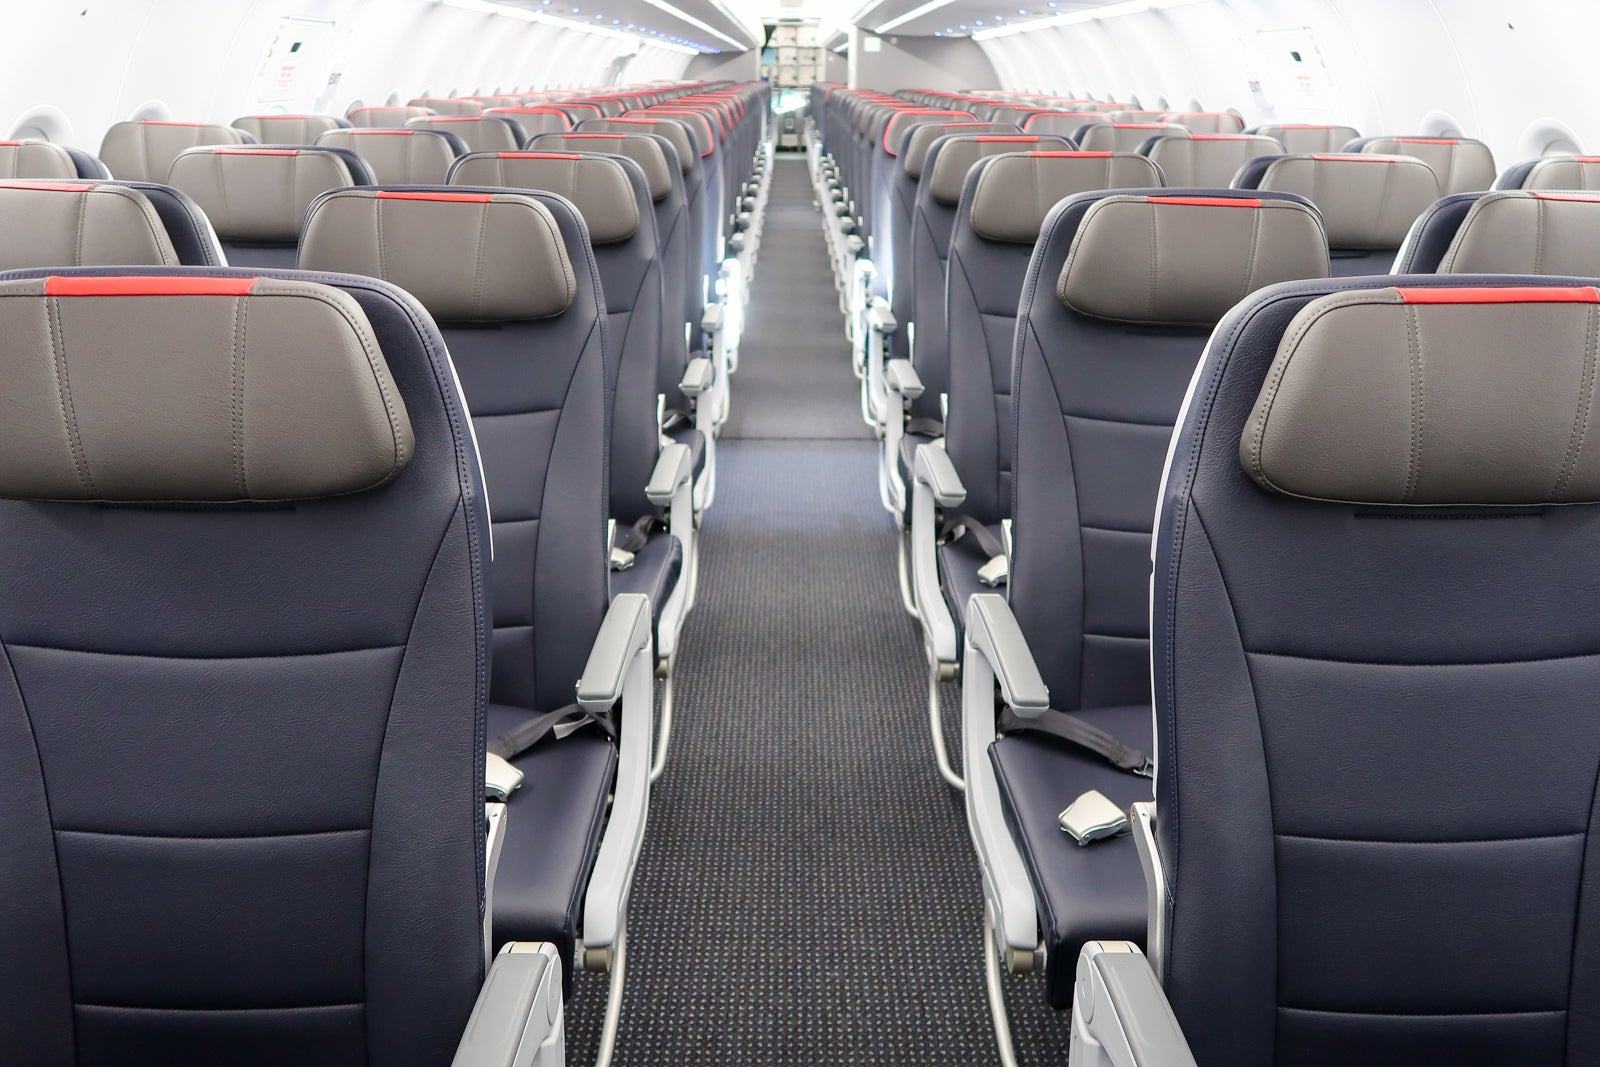 Seat reminder: Delta Comfort+ A321 Row 12… there is NO window. : r/delta